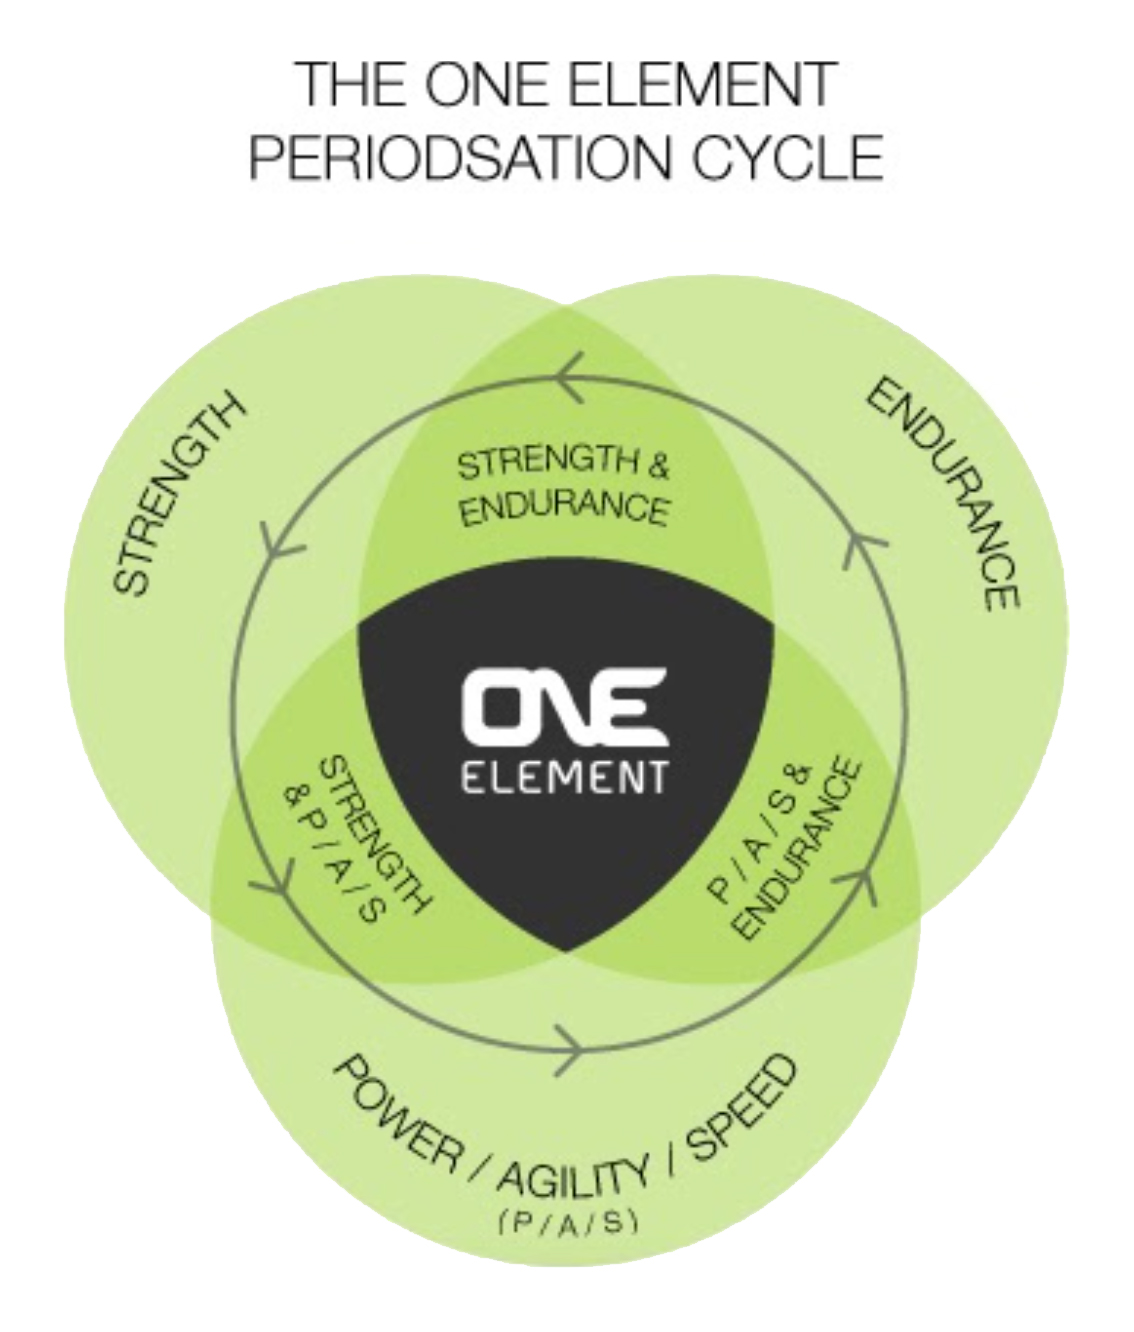 graphic explaining the One Element periodisation cycle